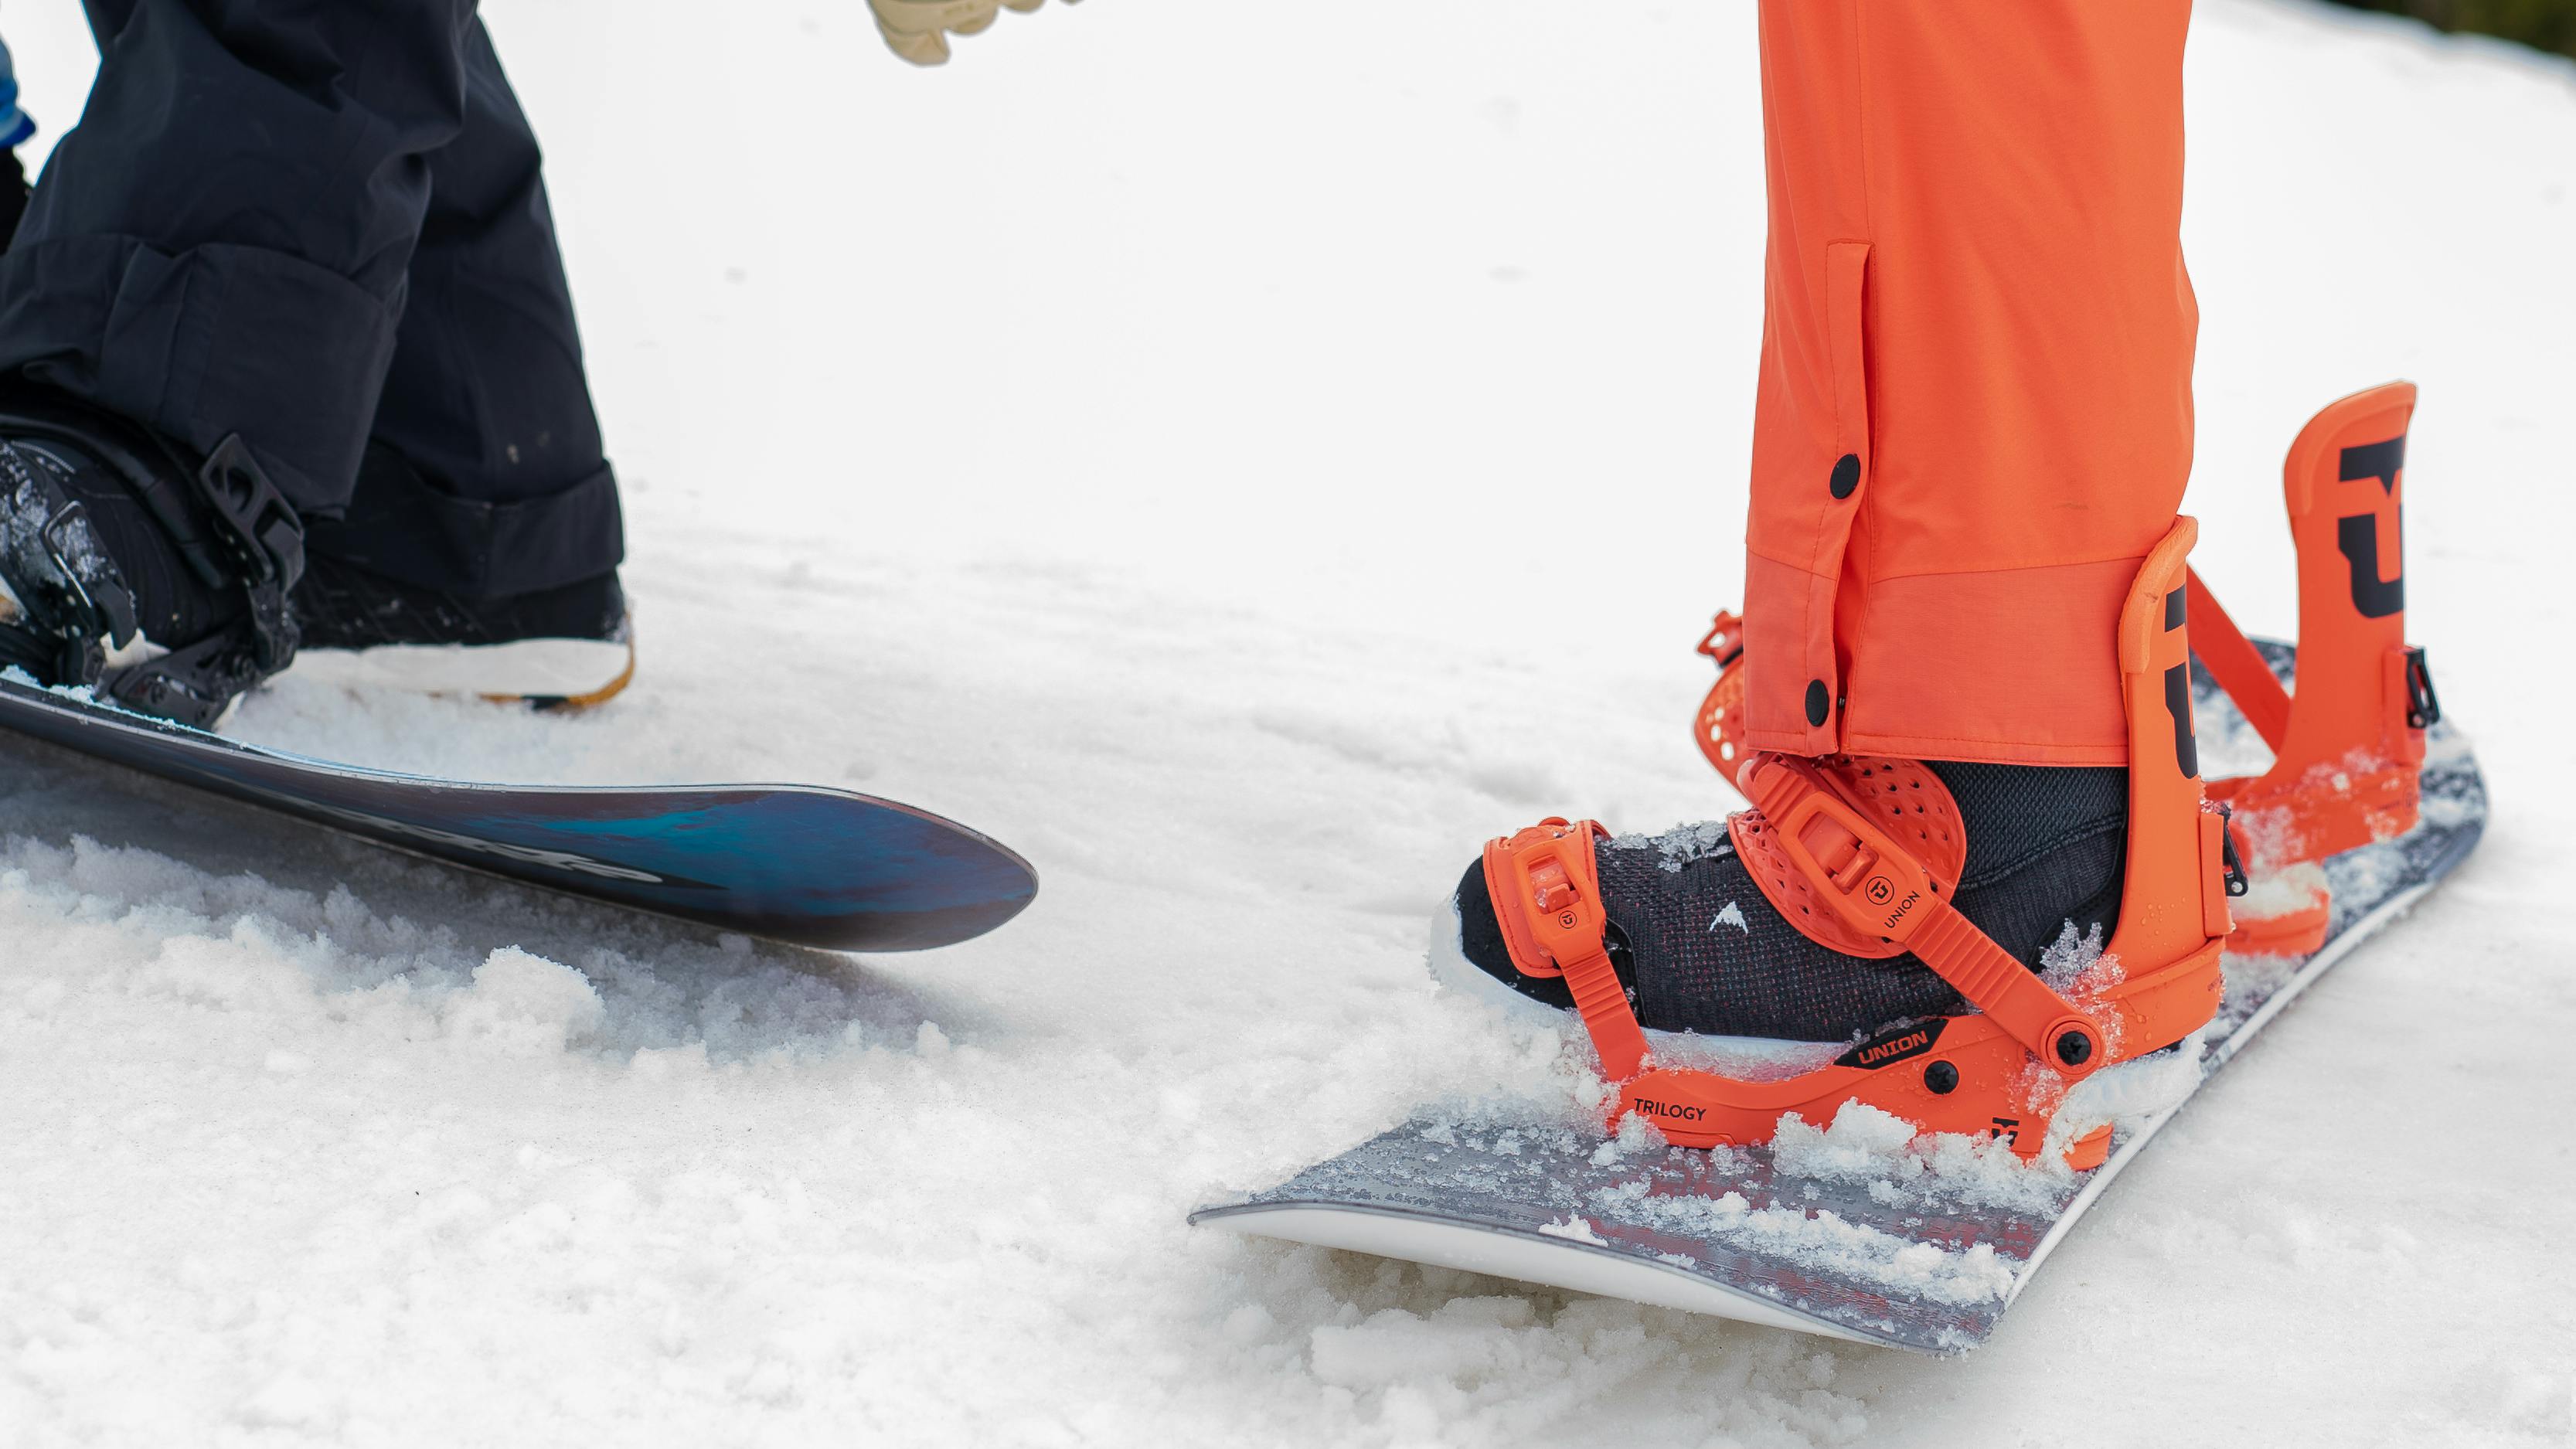 Two people on snowboards stand side by side, not yet strapped in.